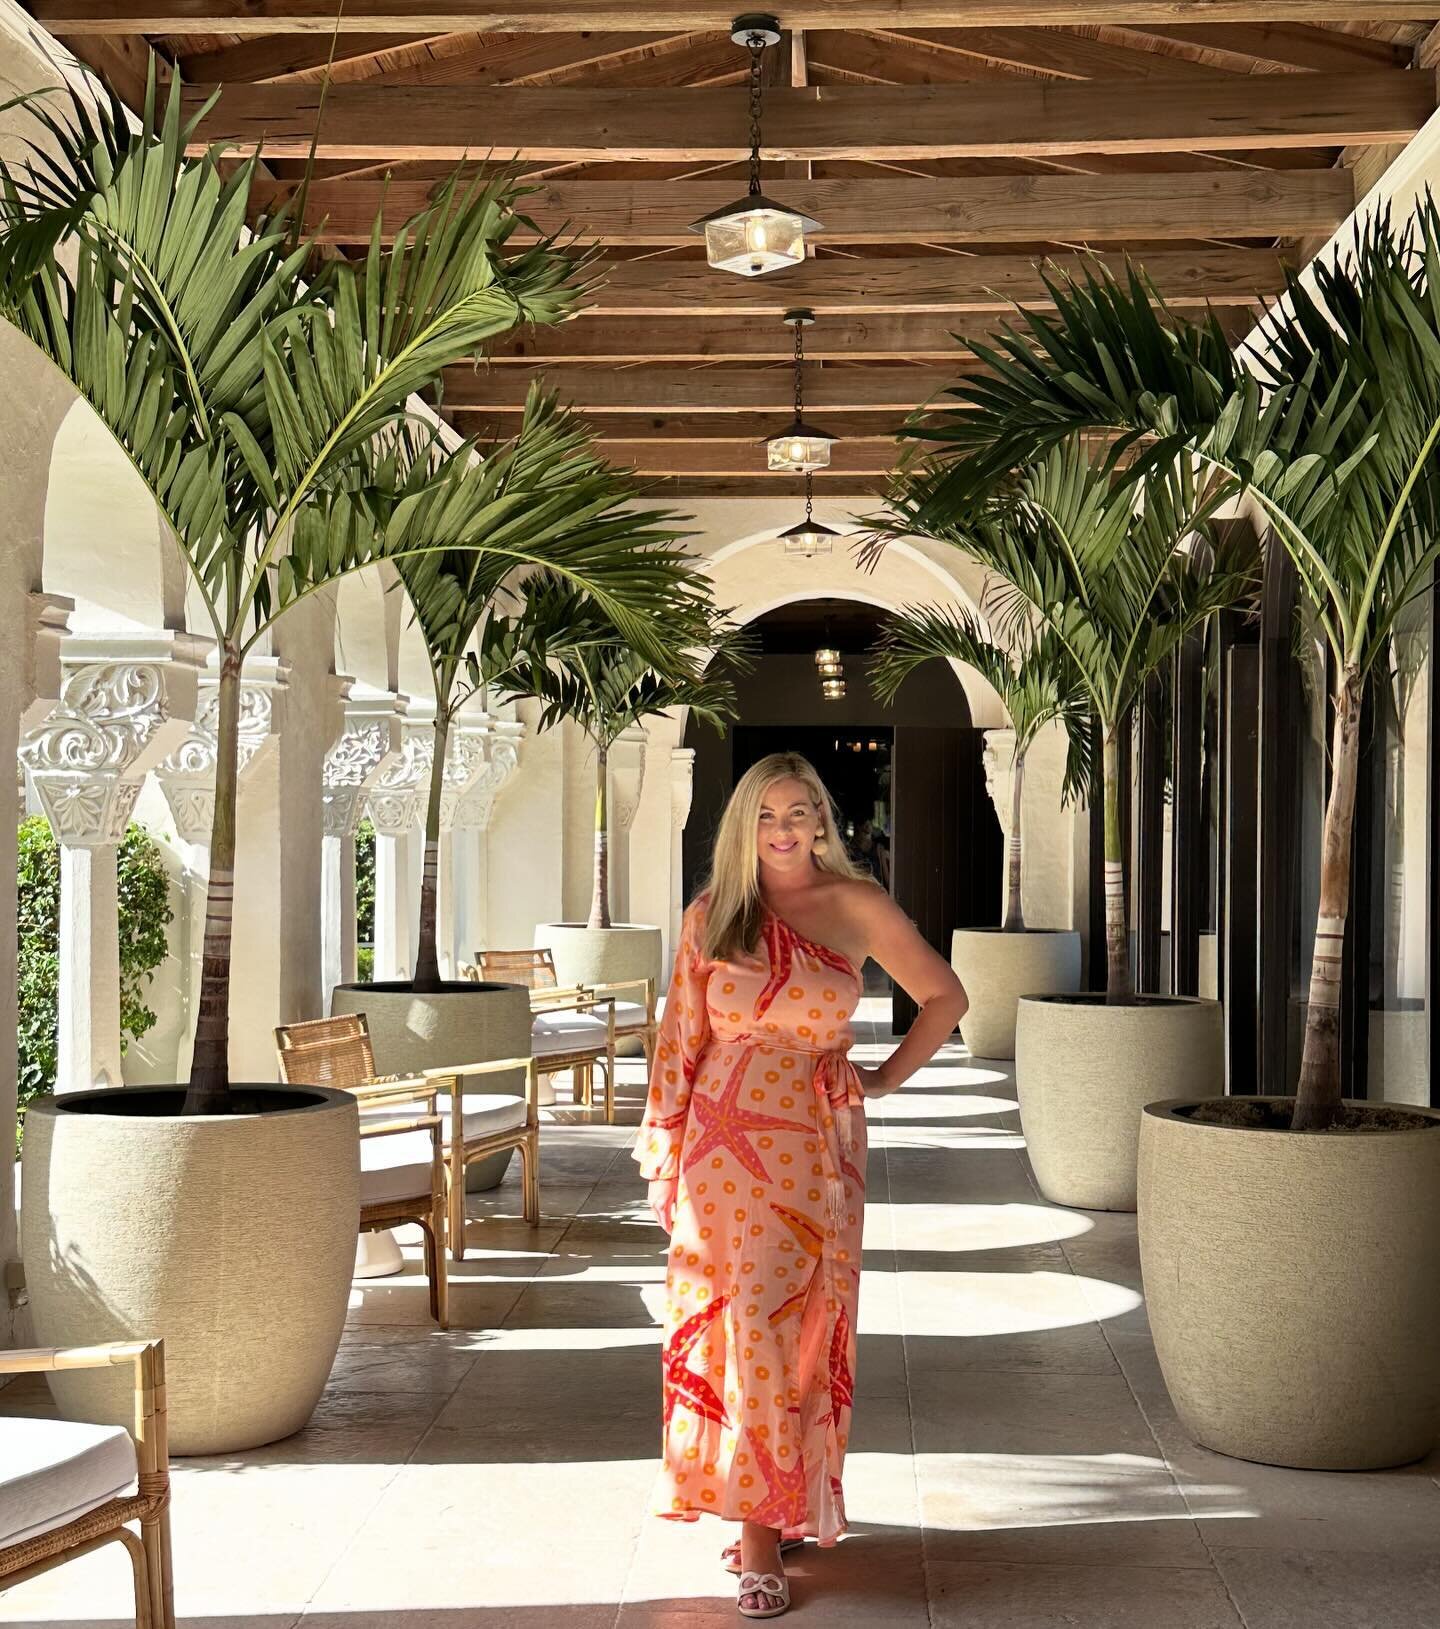 The Boca Raton resort has been a JSJ favorite for many years, going back to my college days when I first stayed at the resort. 

The newly renovated @thebocaraton is a South Florida dream and offers a little something for everyone. Fun for adults, wi